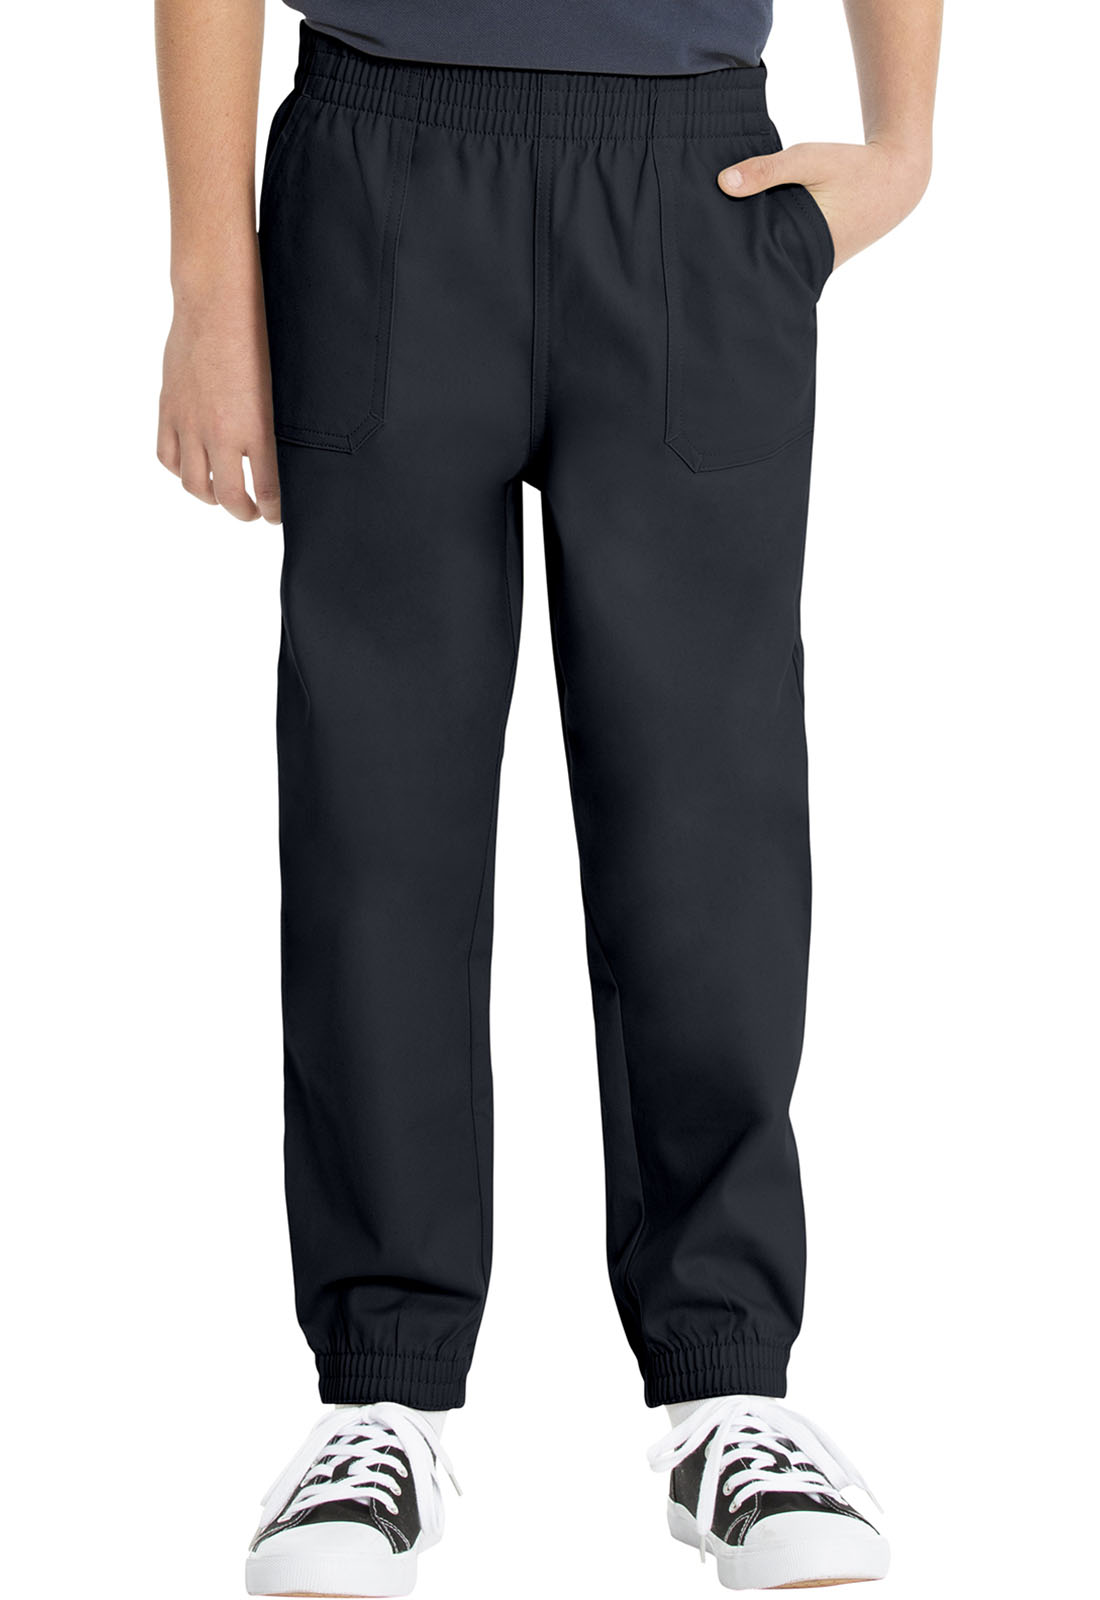 Real School Uniforms - Everybody Pull-on Jogger Pant - Best Value